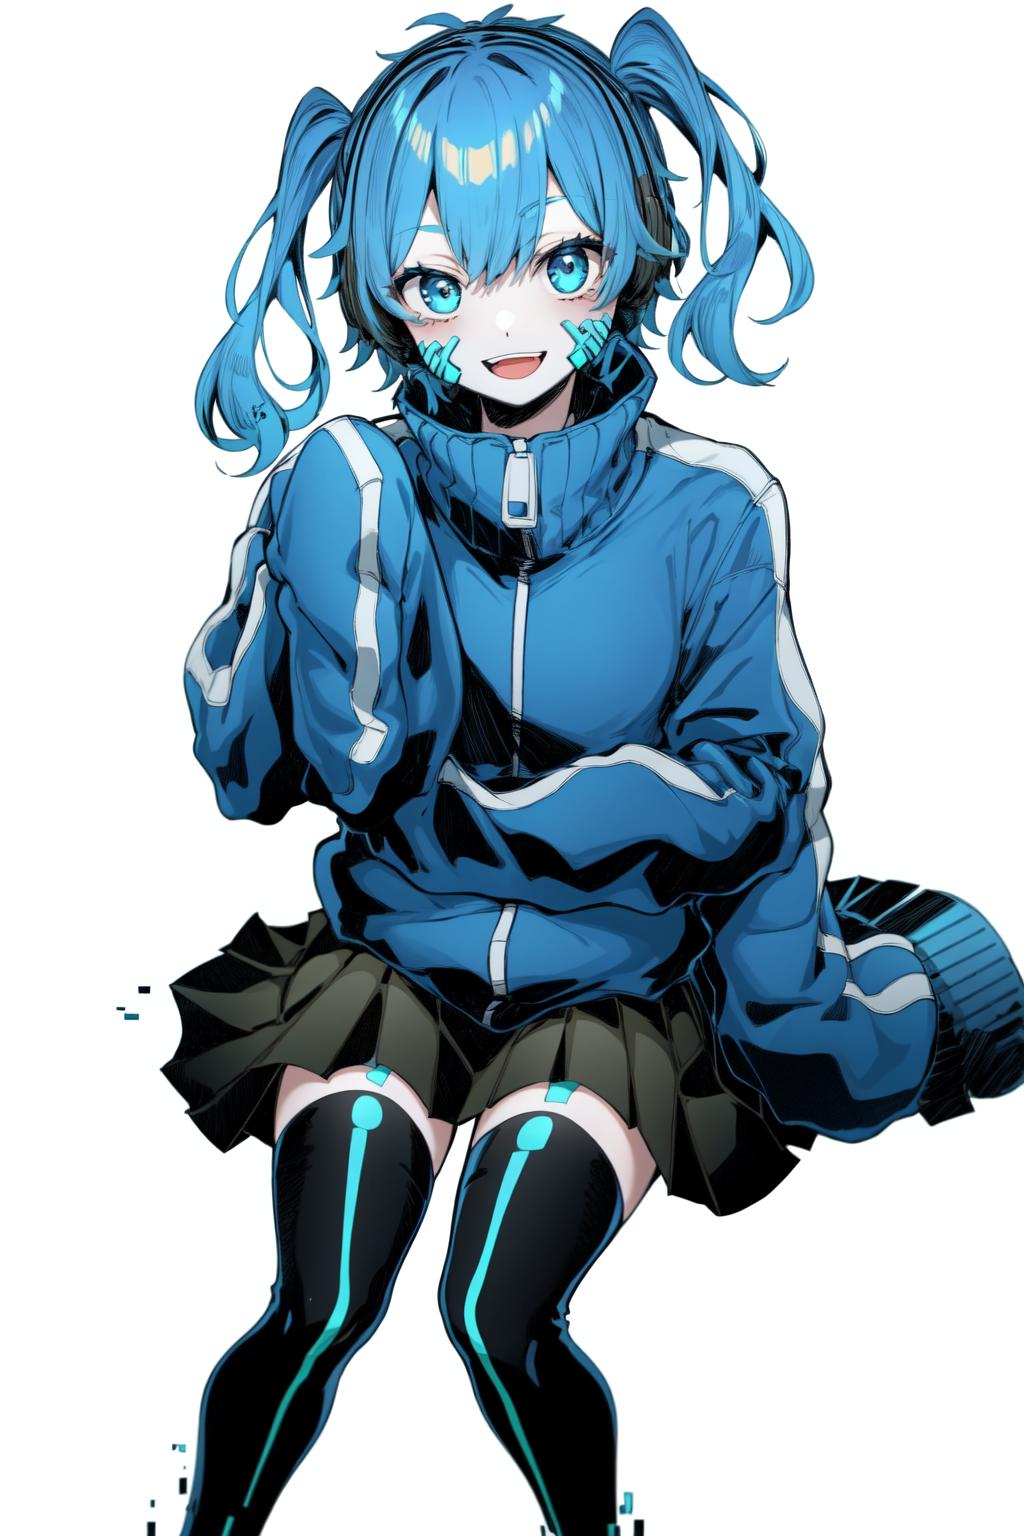 Ene - Cyber Girl | Kagerou Project | LoRA image by L115A4